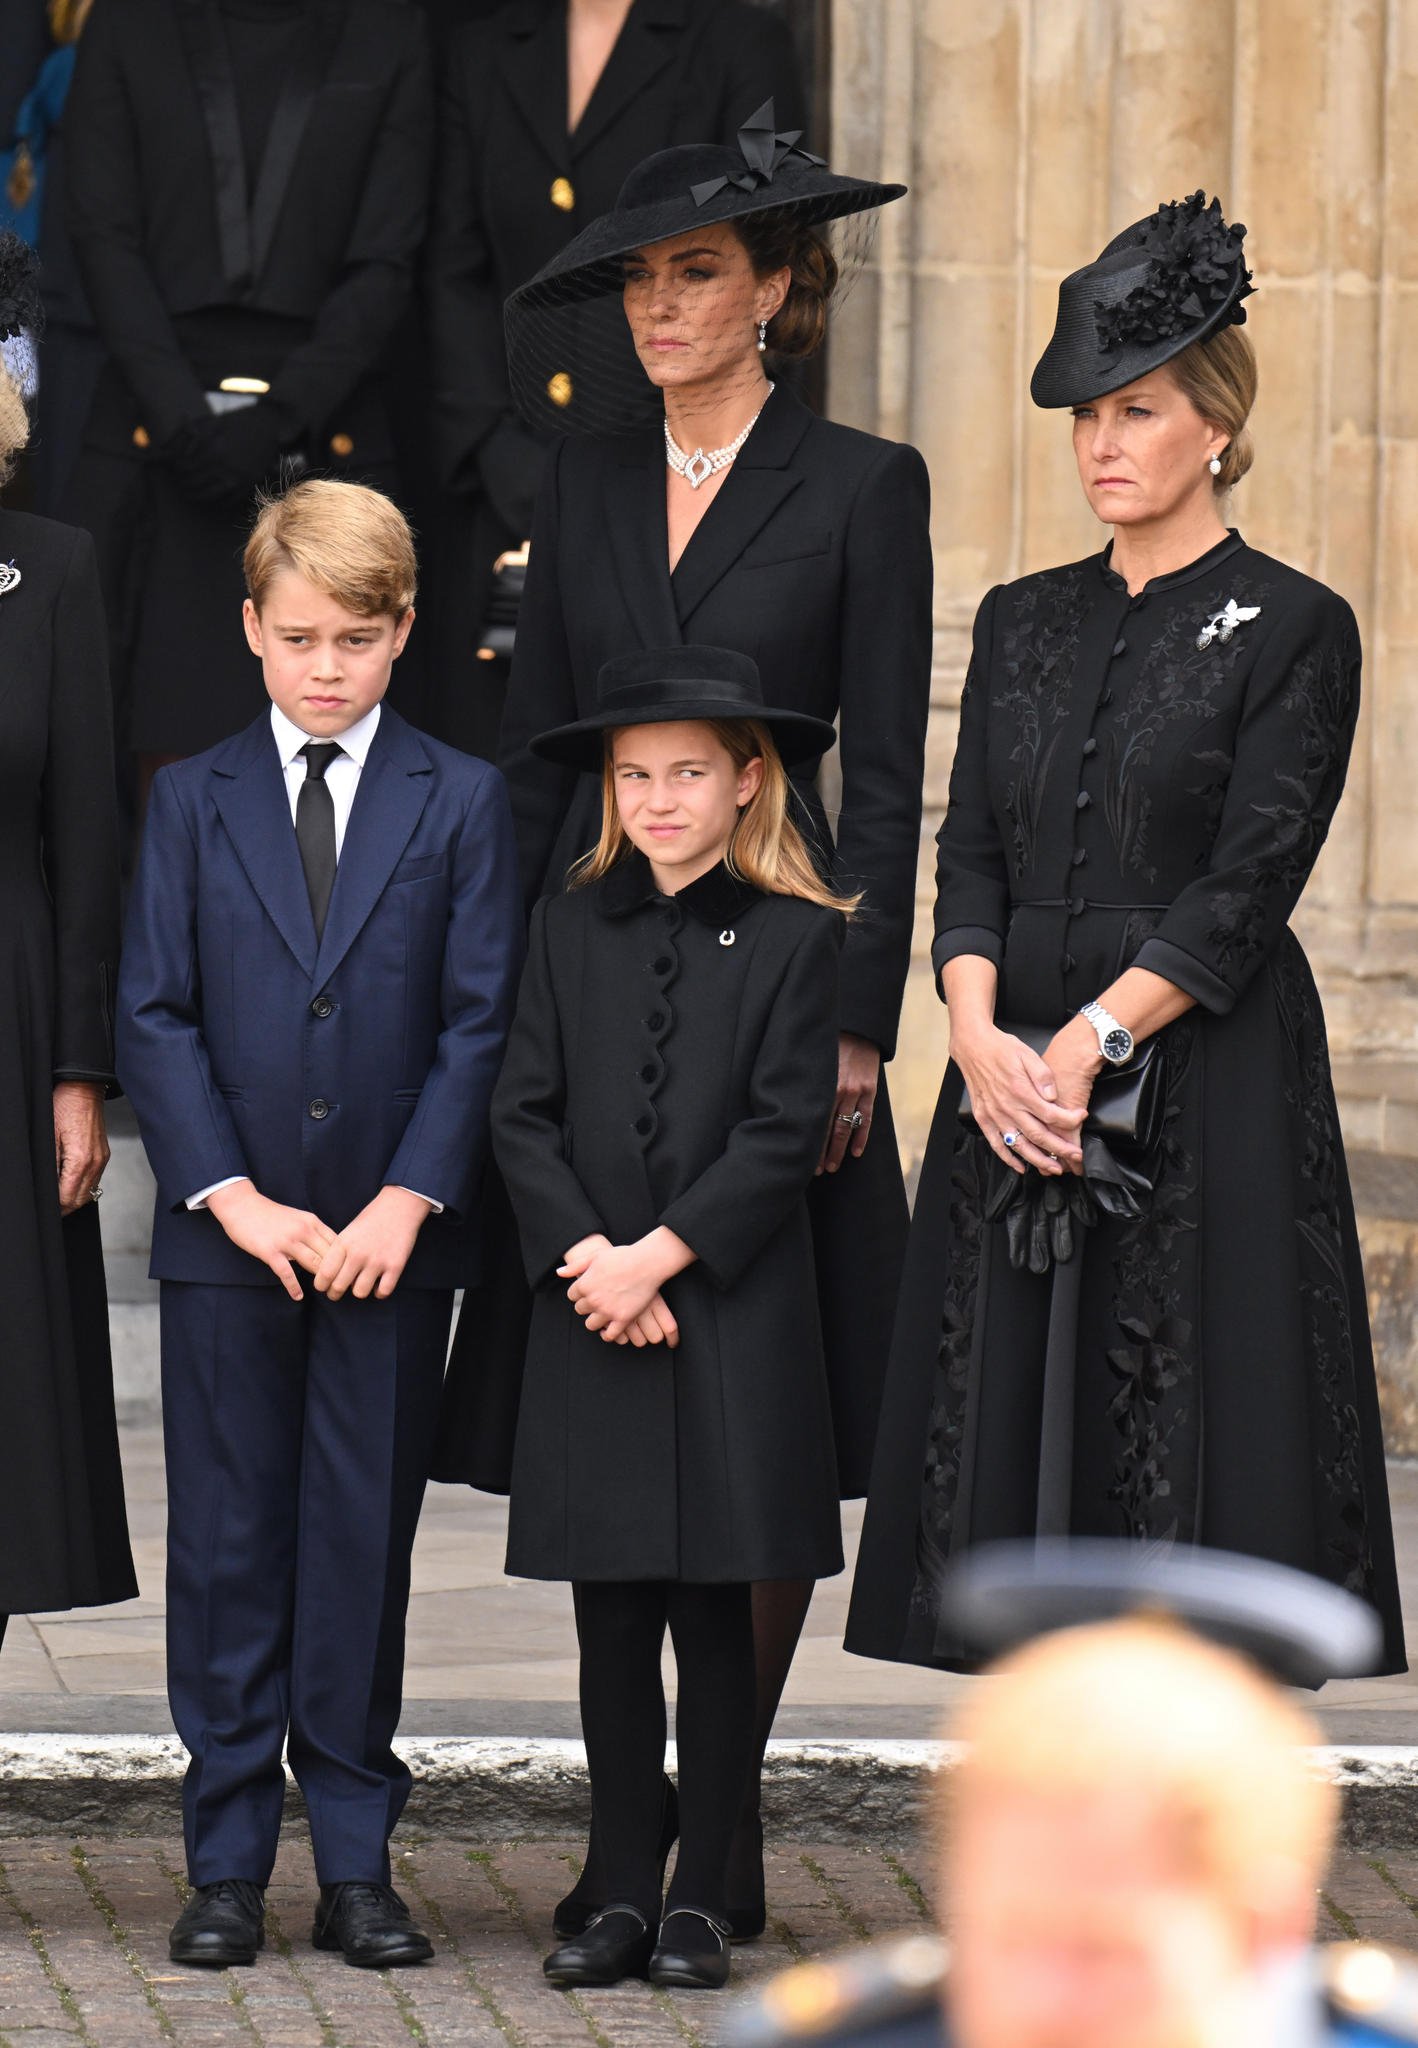 The Princess of Wales Attends The State Funeral of Queen Elizabeth II ...